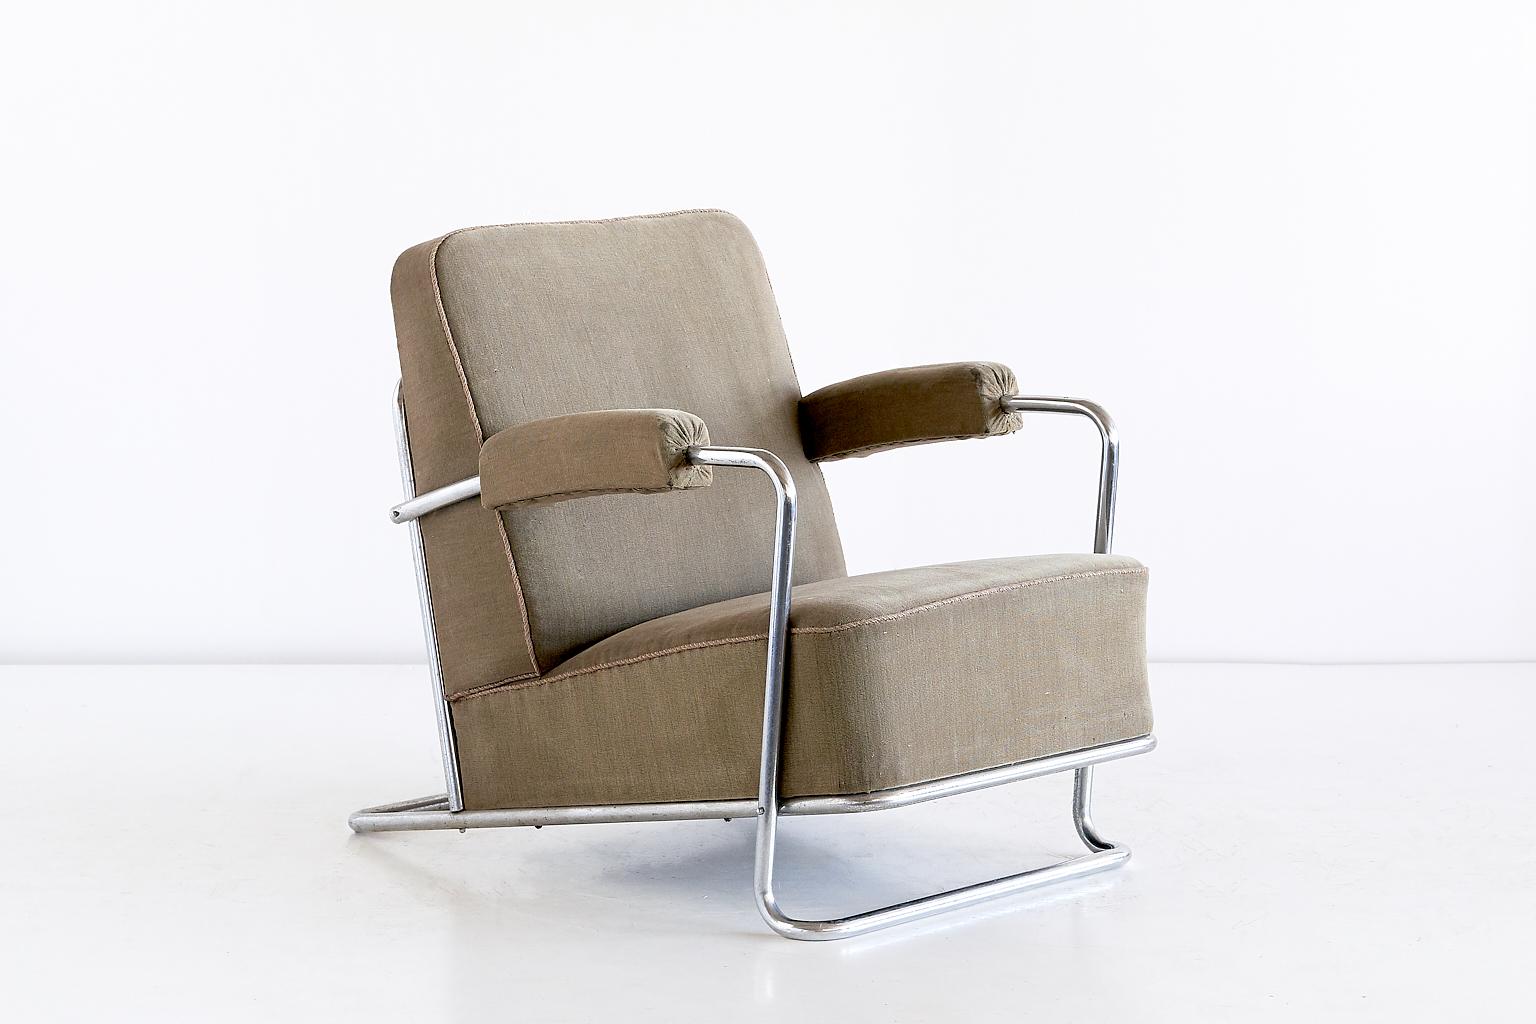 This rare, well-documented lounge chair was designed by the French designer René Coquery and produced by Thonet in 1929-1930. The tilted frame is made of bent, welded and chromed tubular steel. The very comfortable deep sprung-upholstered seat and